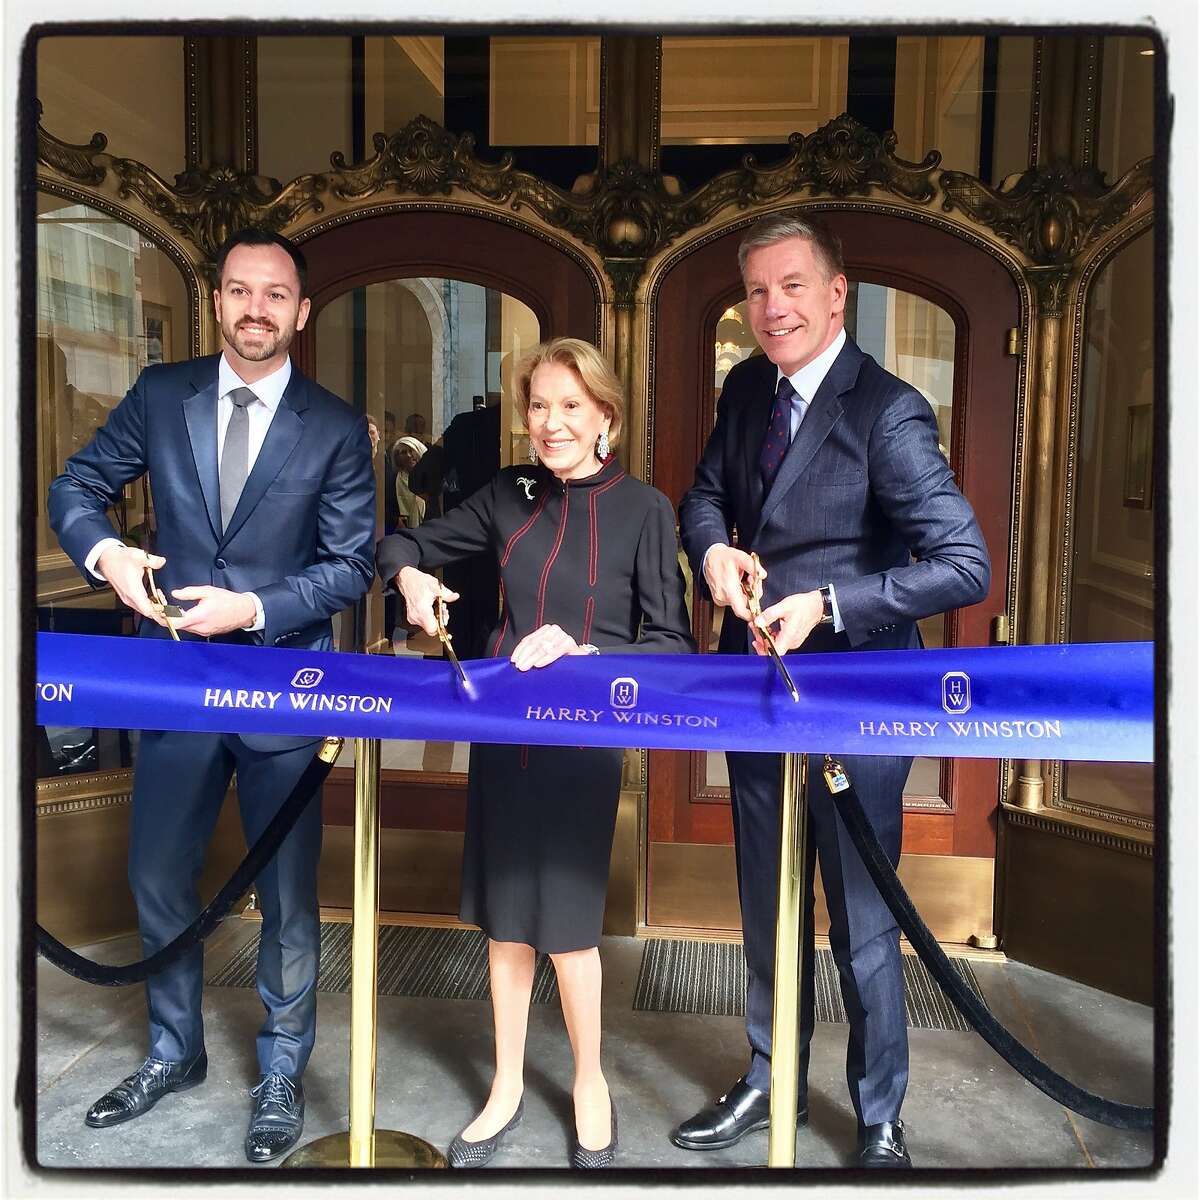 Harry Winston SF Salon Manager Matthew Coleman (left) with Charlotte Shultz and Winston exec Michael Moser. March 7, 2018.